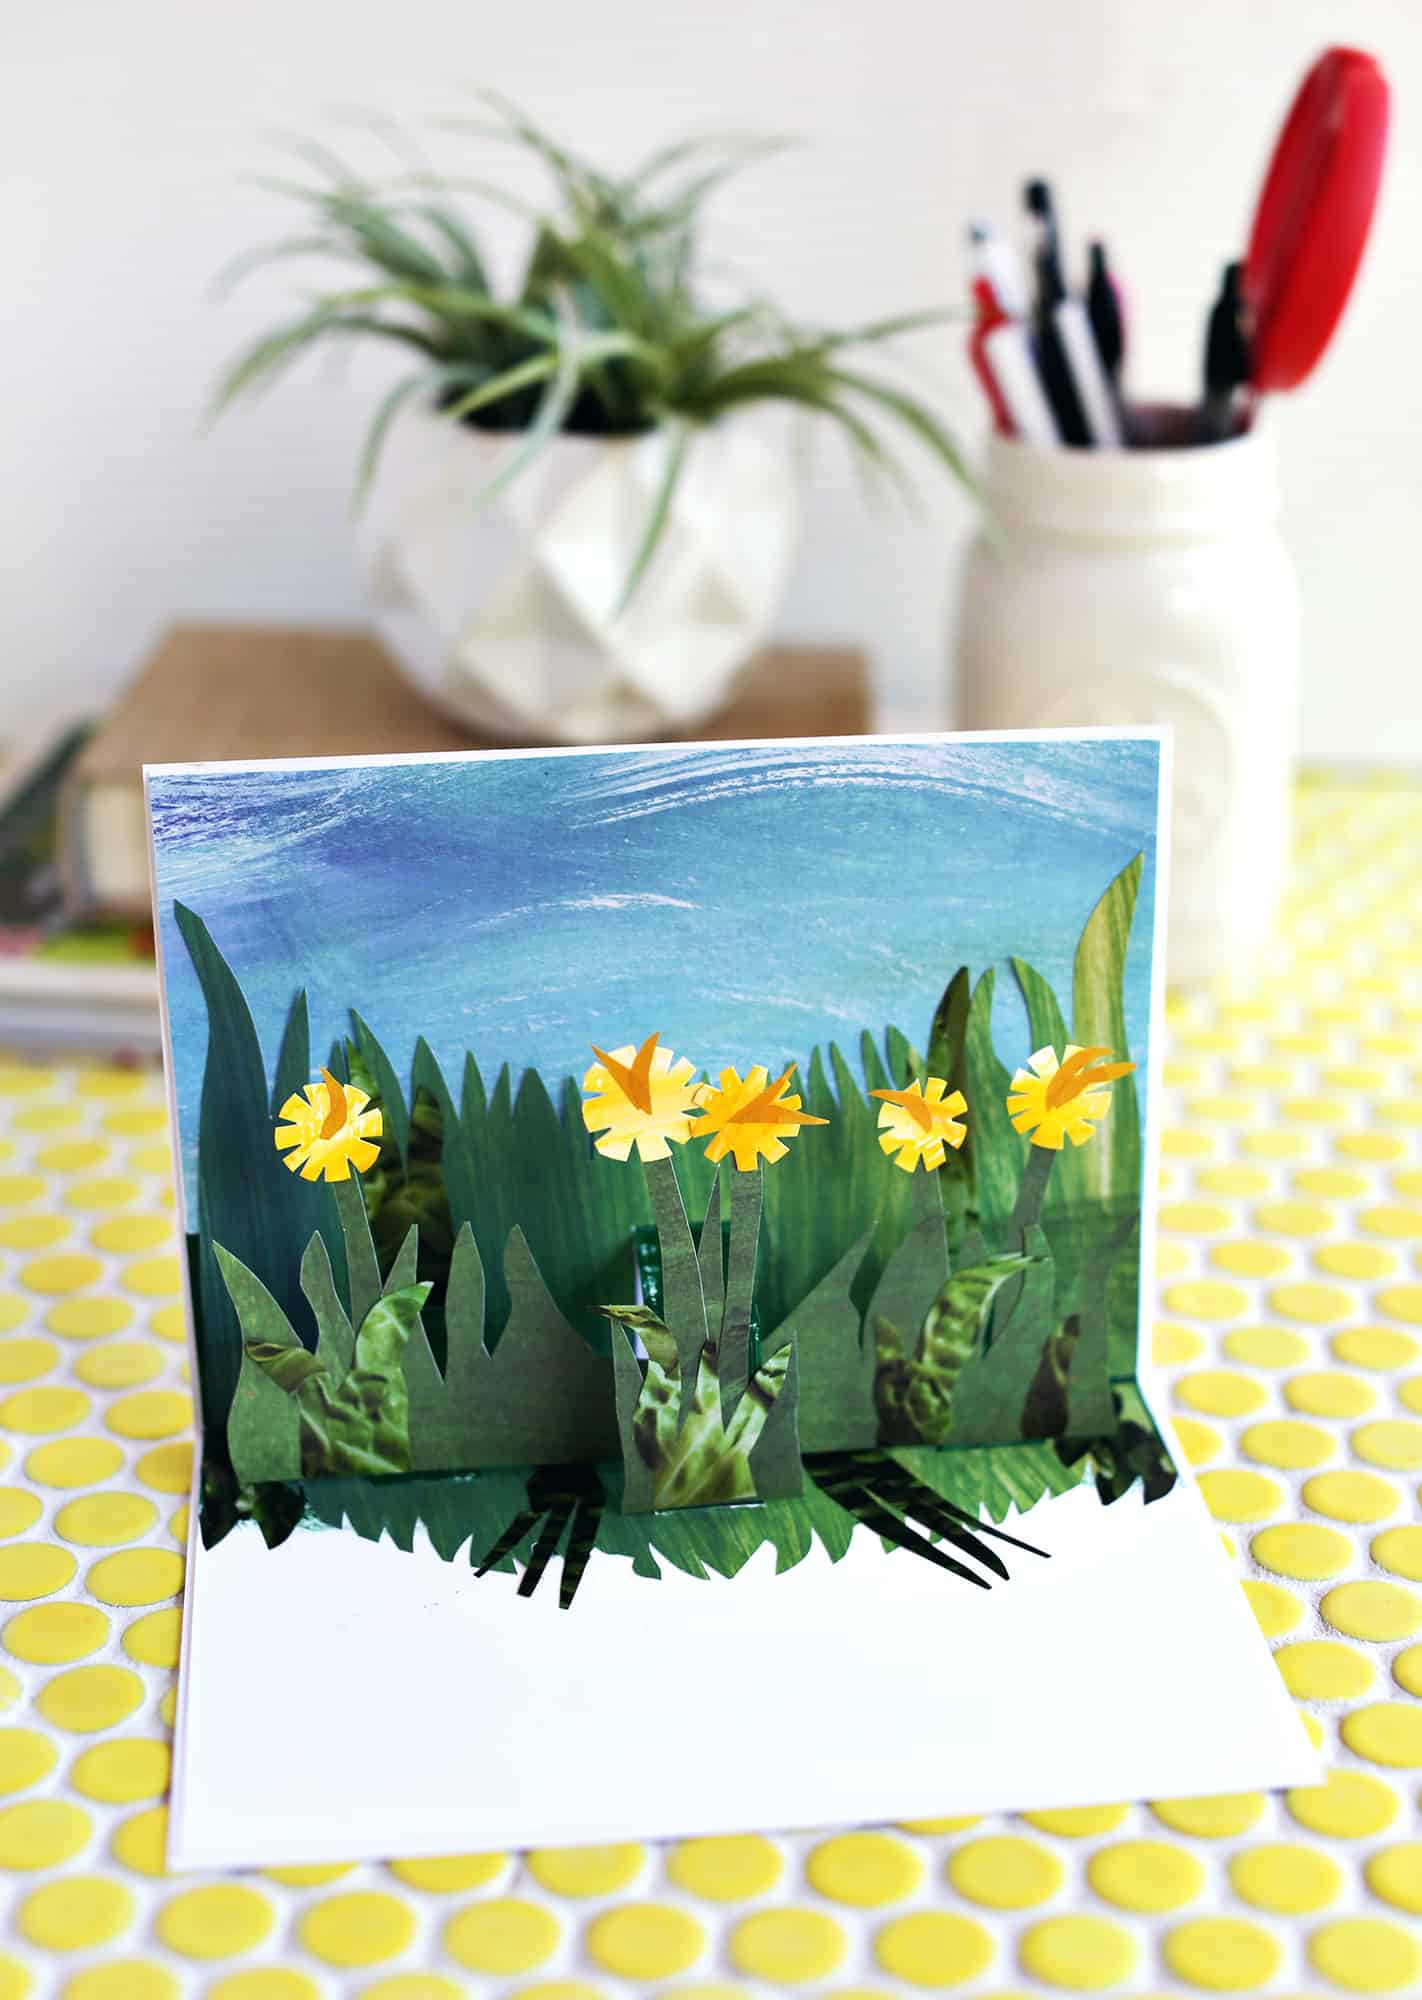 Gendanne studie Ledig How to Make a Simple Pop-Up Card - A Beautiful Mess